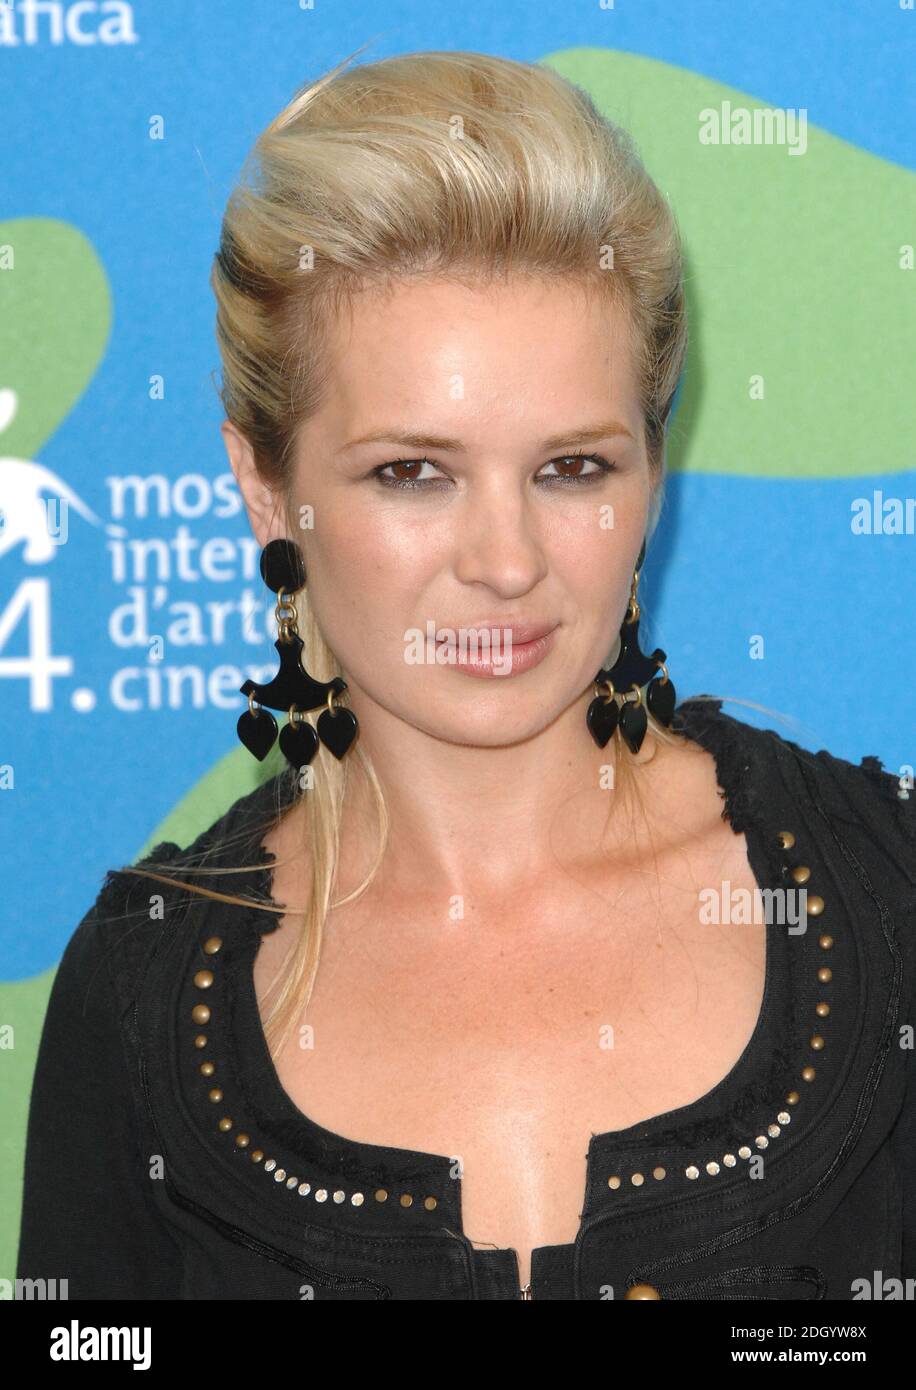 Kierston Wareing at the Venice Film Festival 2007 in Italy. Stock Photo